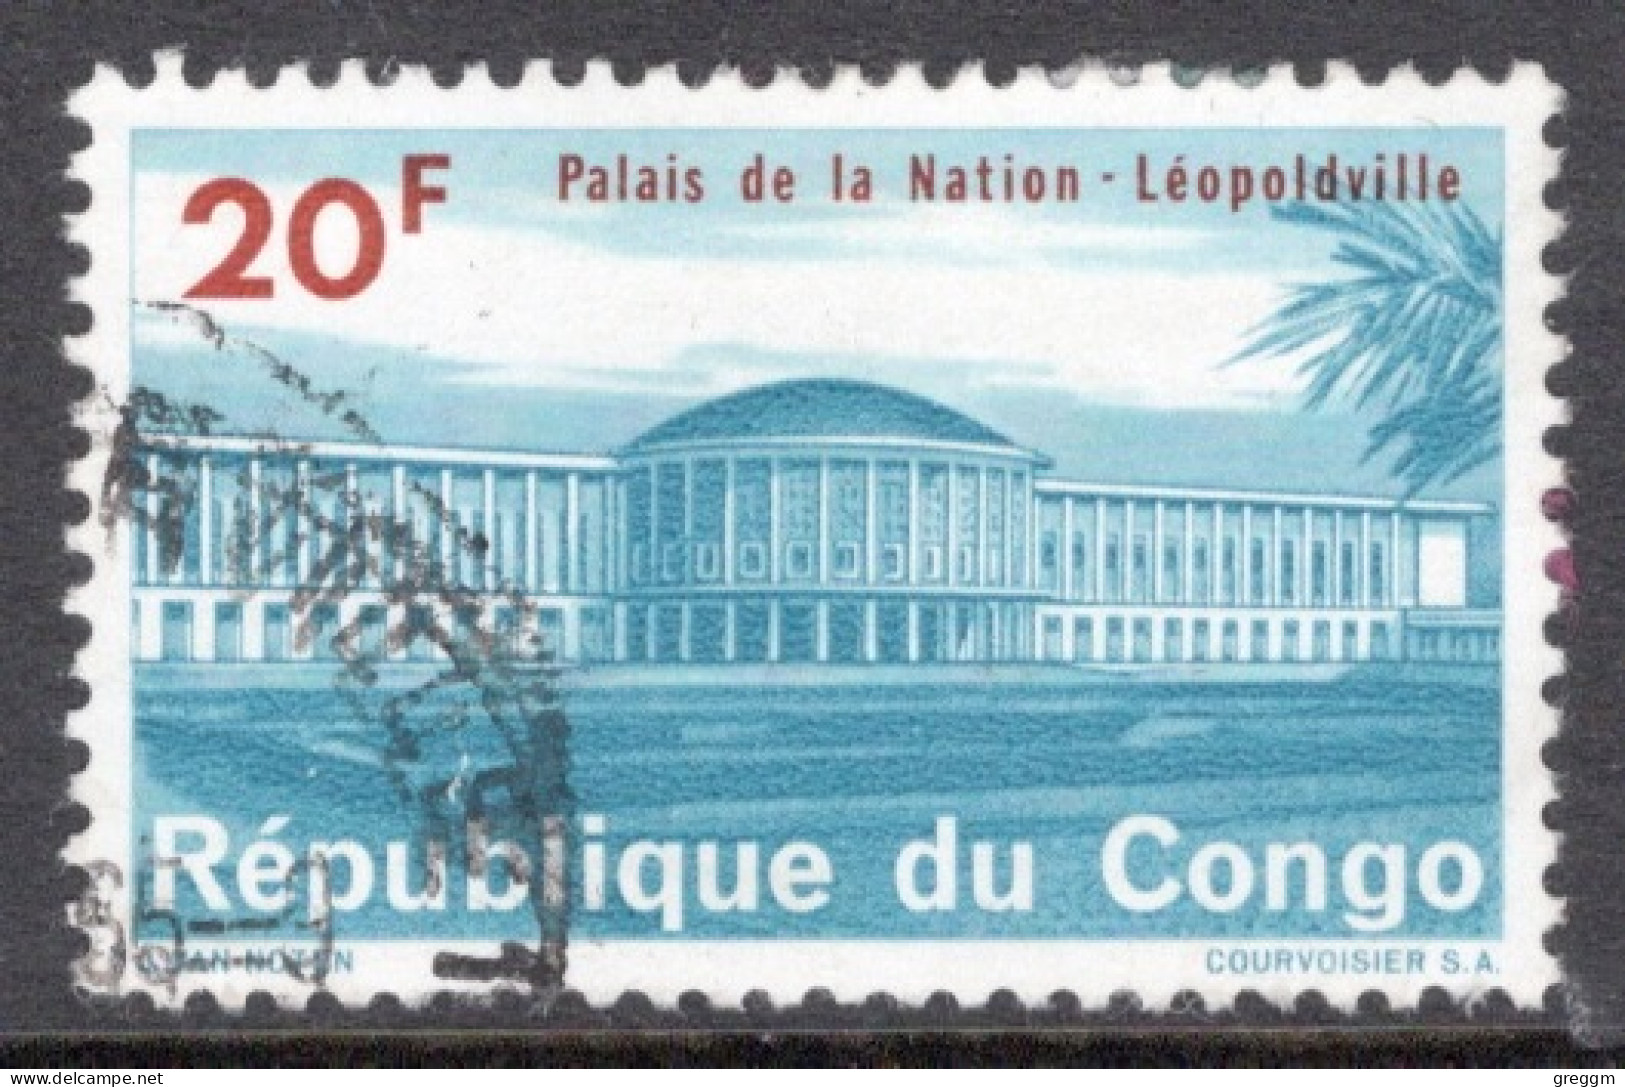 Kinshasa Congo 1964 Single 20f Stamp From The Definitive Set  National Palace, Leopoldville  In Fine Used. - Used Stamps